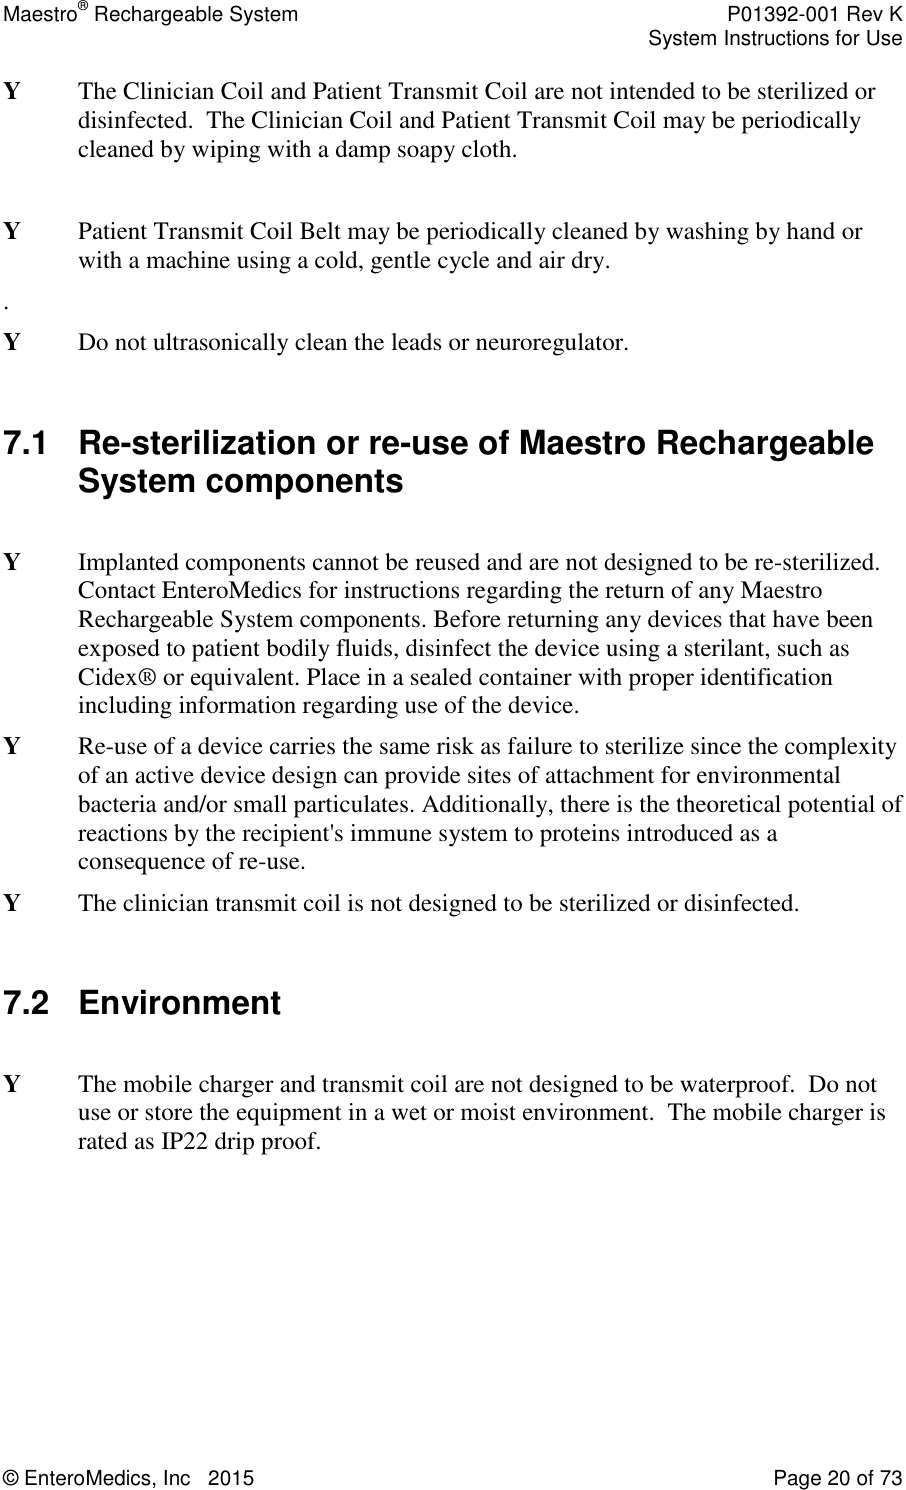 Maestro® Rechargeable System    P01392-001 Rev K     System Instructions for Use  © EnteroMedics, Inc   2015  Page 20 of 73  Y  The Clinician Coil and Patient Transmit Coil are not intended to be sterilized or disinfected.  The Clinician Coil and Patient Transmit Coil may be periodically cleaned by wiping with a damp soapy cloth.   Y  Patient Transmit Coil Belt may be periodically cleaned by washing by hand or with a machine using a cold, gentle cycle and air dry. . Y  Do not ultrasonically clean the leads or neuroregulator.  7.1 Re-sterilization or re-use of Maestro Rechargeable System components   Y  Implanted components cannot be reused and are not designed to be re-sterilized. Contact EnteroMedics for instructions regarding the return of any Maestro Rechargeable System components. Before returning any devices that have been exposed to patient bodily fluids, disinfect the device using a sterilant, such as Cidex® or equivalent. Place in a sealed container with proper identification including information regarding use of the device. Y Re-use of a device carries the same risk as failure to sterilize since the complexity of an active device design can provide sites of attachment for environmental bacteria and/or small particulates. Additionally, there is the theoretical potential of reactions by the recipient&apos;s immune system to proteins introduced as a consequence of re-use. Y  The clinician transmit coil is not designed to be sterilized or disinfected.  7.2  Environment   Y  The mobile charger and transmit coil are not designed to be waterproof.  Do not use or store the equipment in a wet or moist environment.  The mobile charger is rated as IP22 drip proof.  